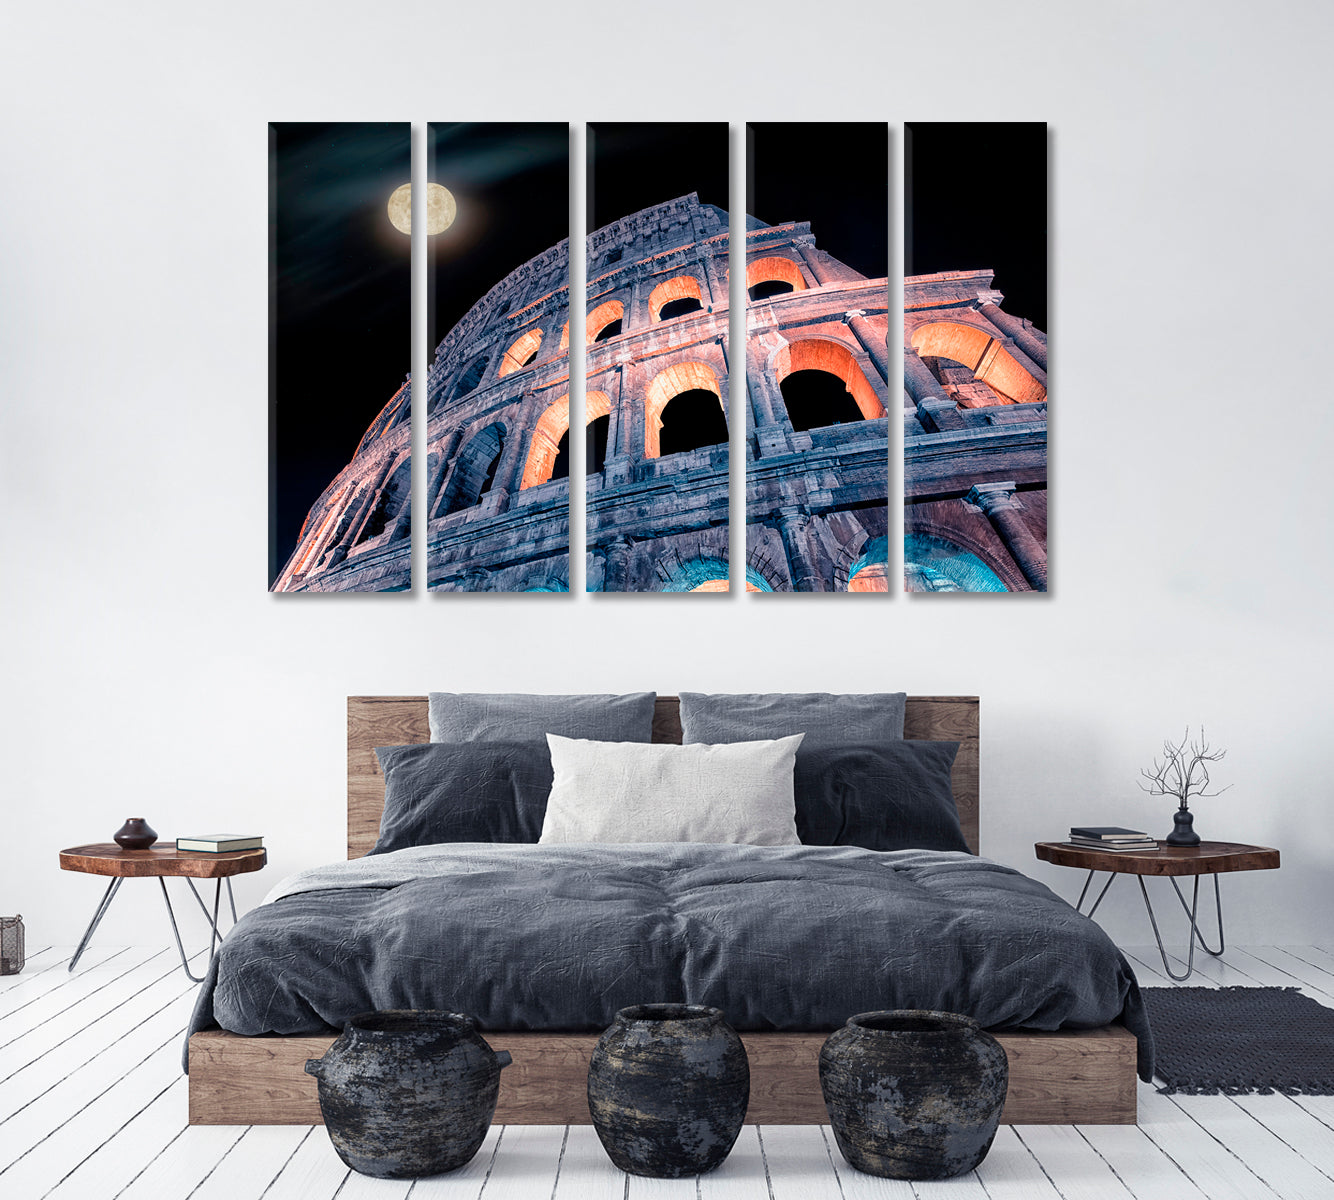 Rome Colosseum at Night Italy Canvas Print ArtLexy   